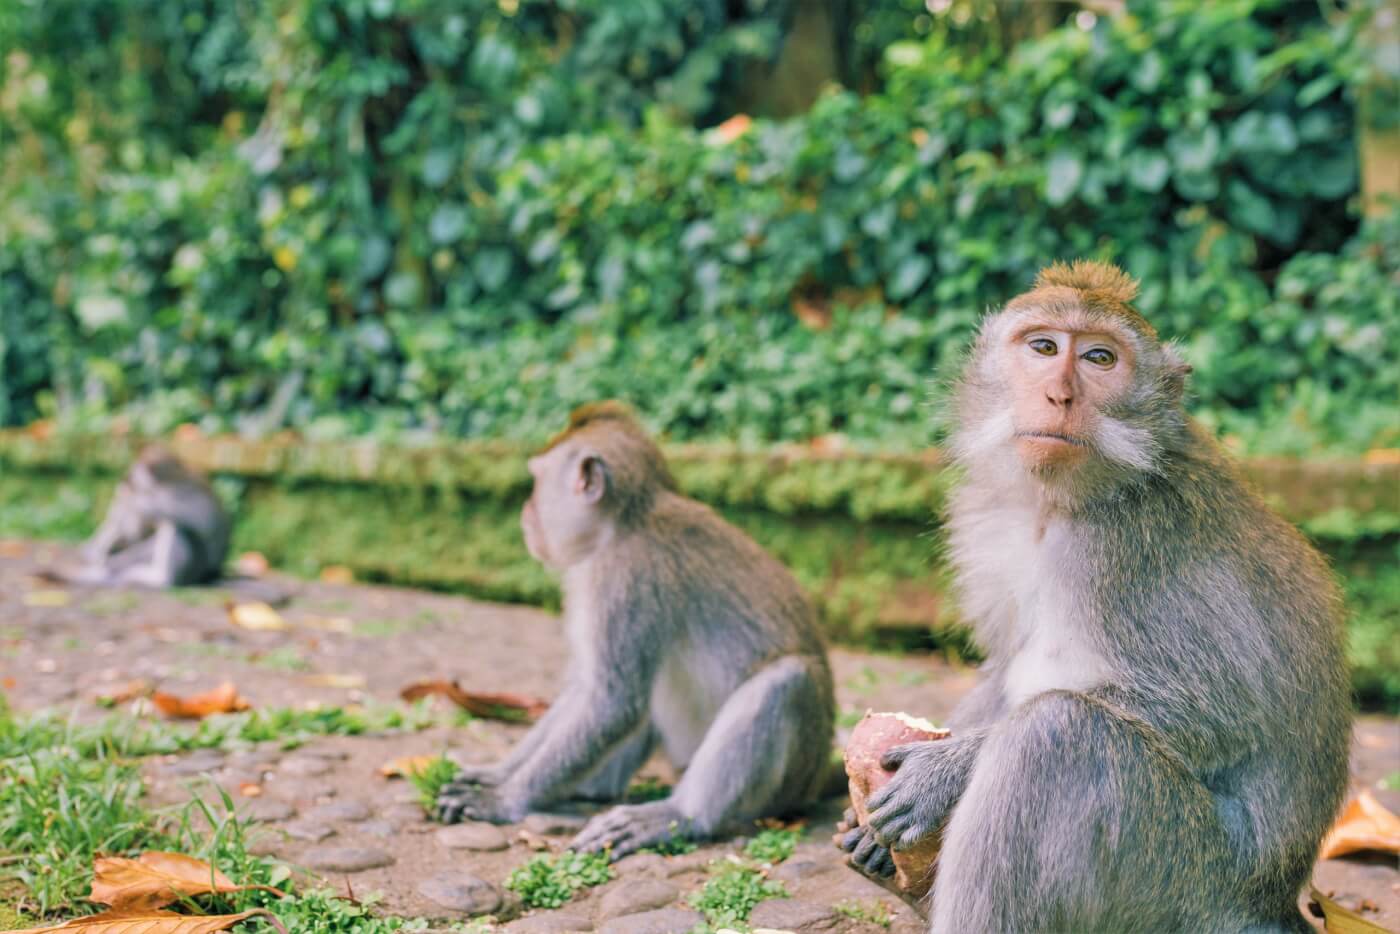 long tailed macaques on dirt path